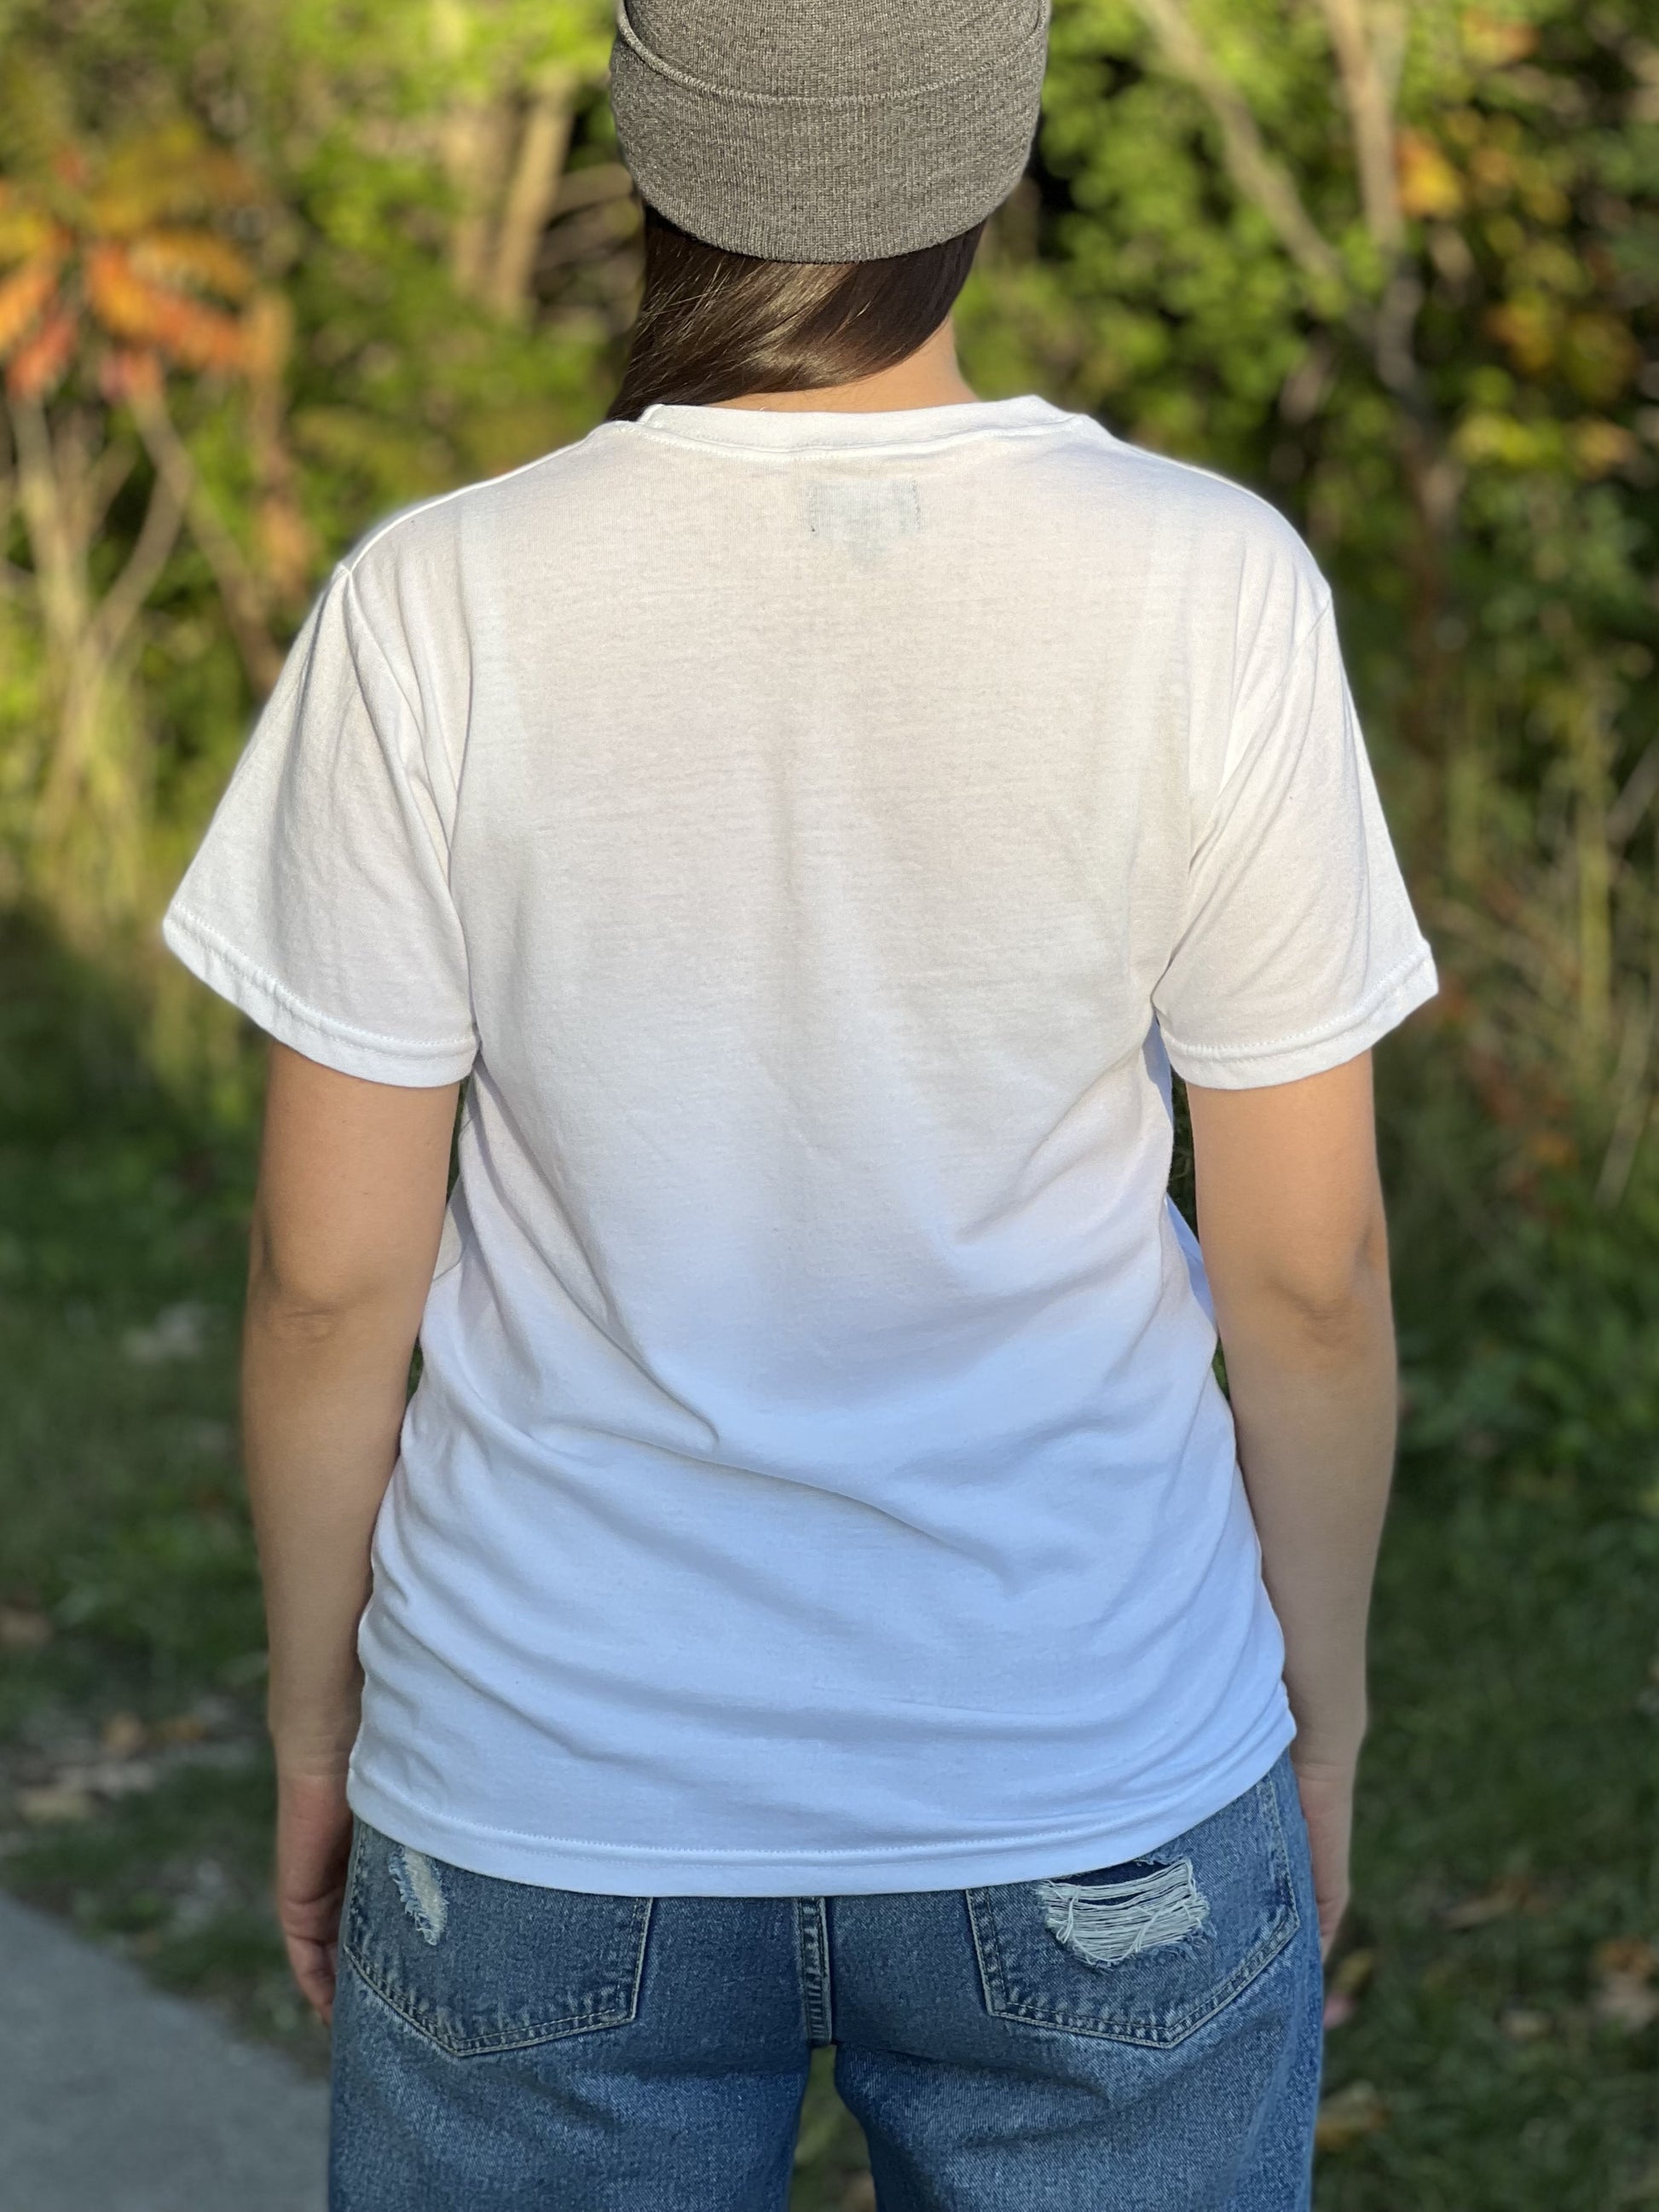 Back view of a woman wearing a white t-shirt.